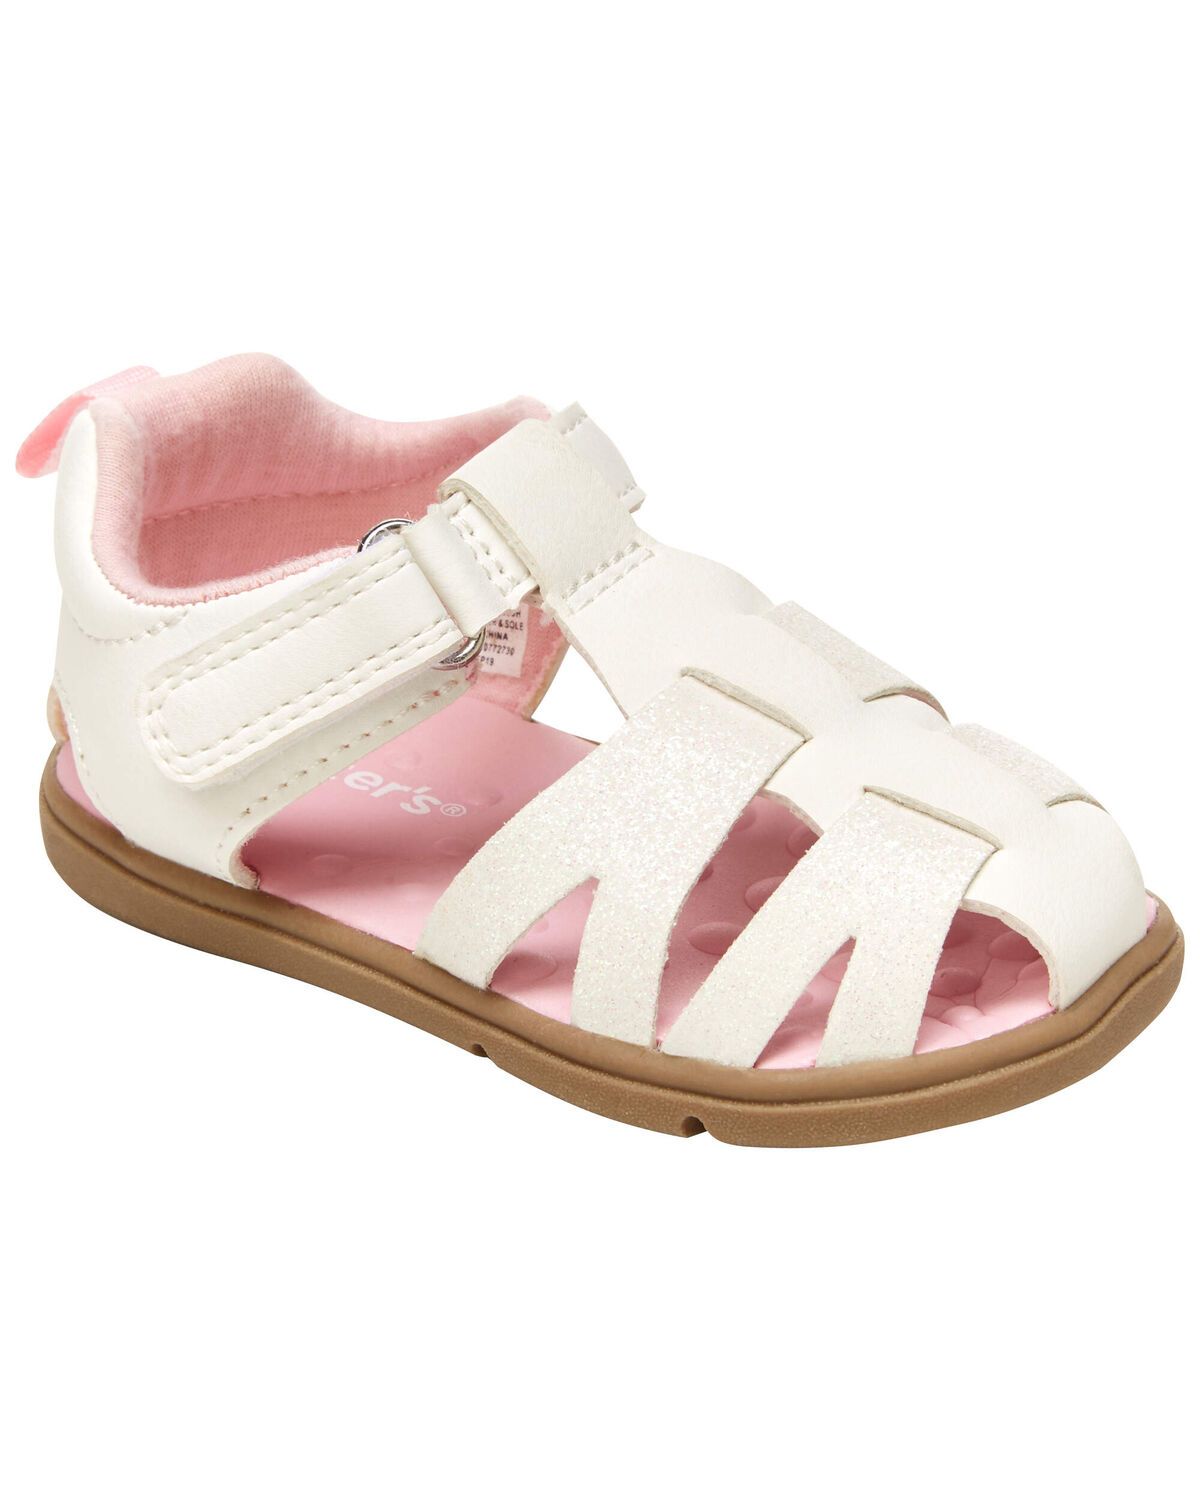 Baby Every Step® Fisherman Sandals | Carter's